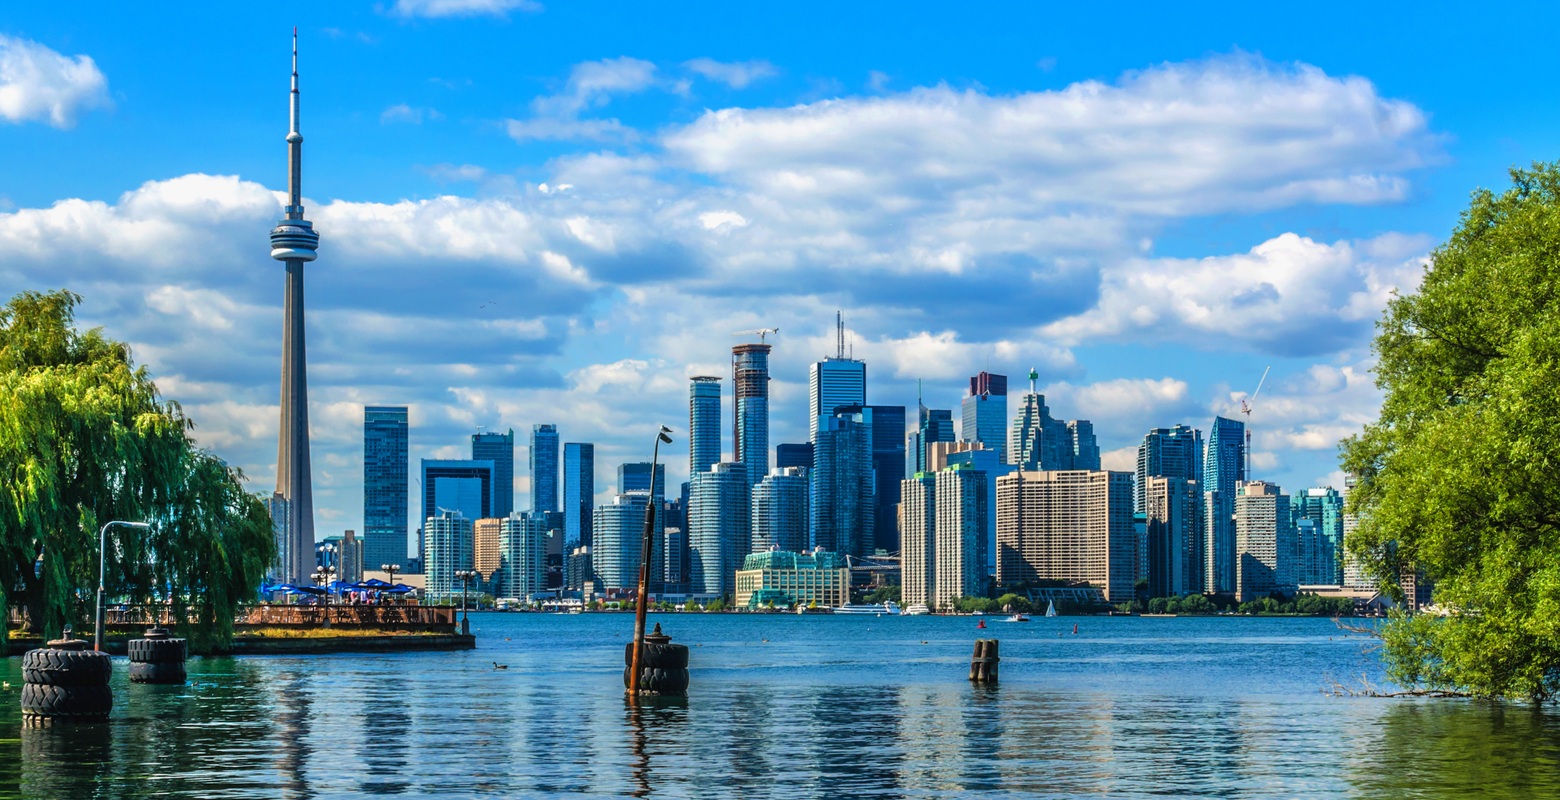 For a piece on where to stay in Toronto, a skyline looms large over a lake